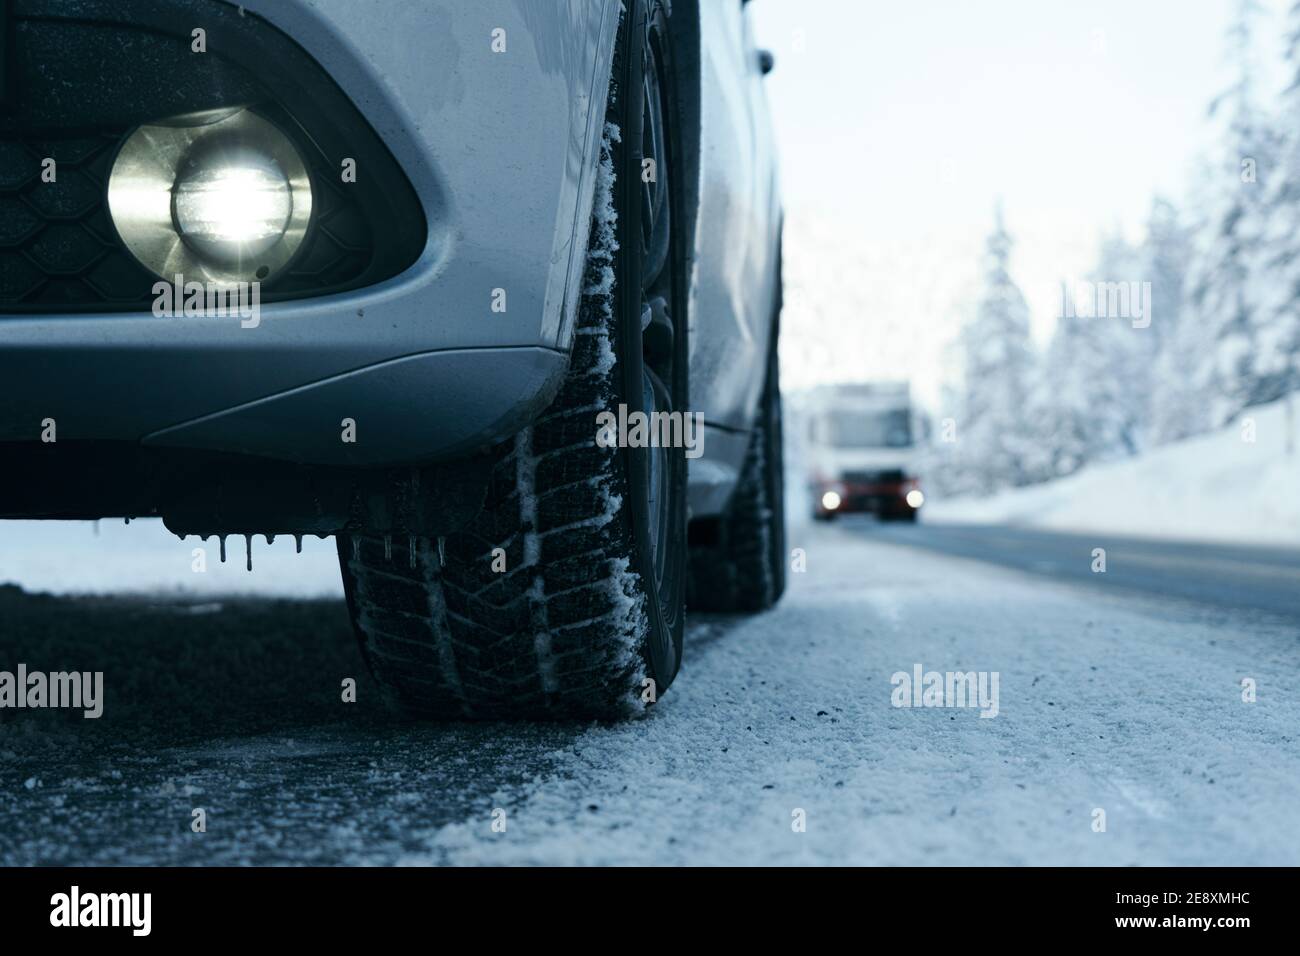 Close-up of winter car tires with alloy wheel and bumper of sport utility vehicle on icy mountain road covered with snow, Italy Stock Photo